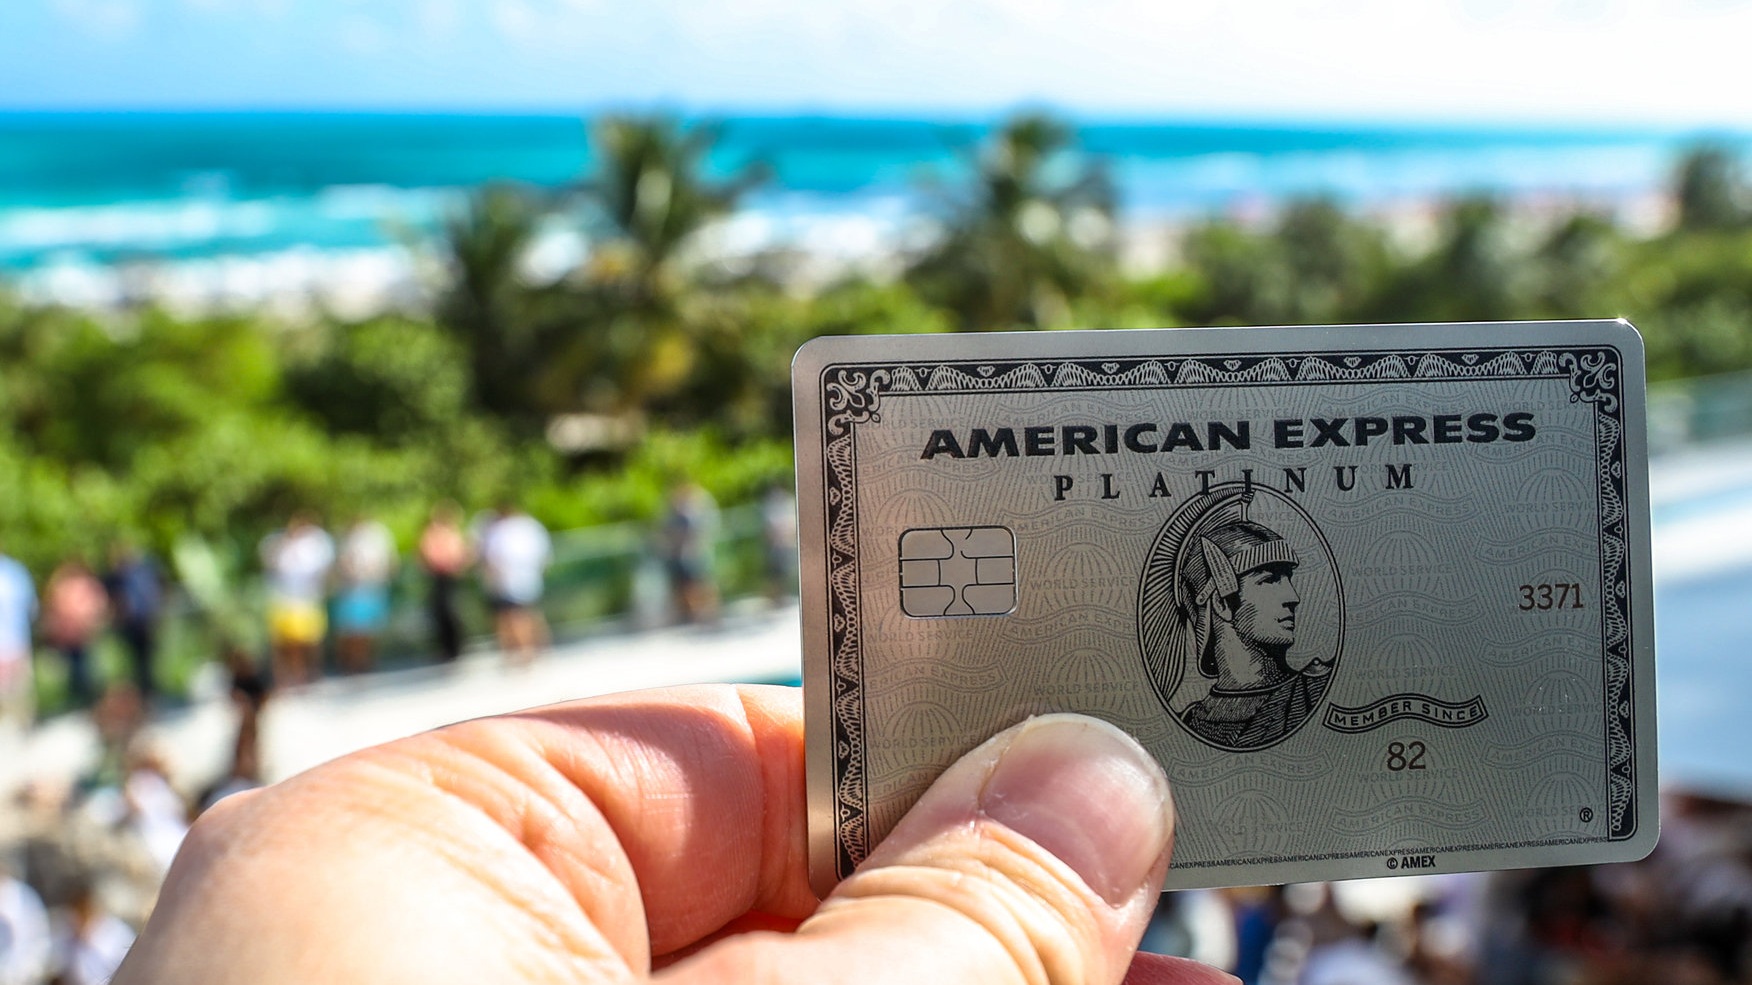 american express travel questions